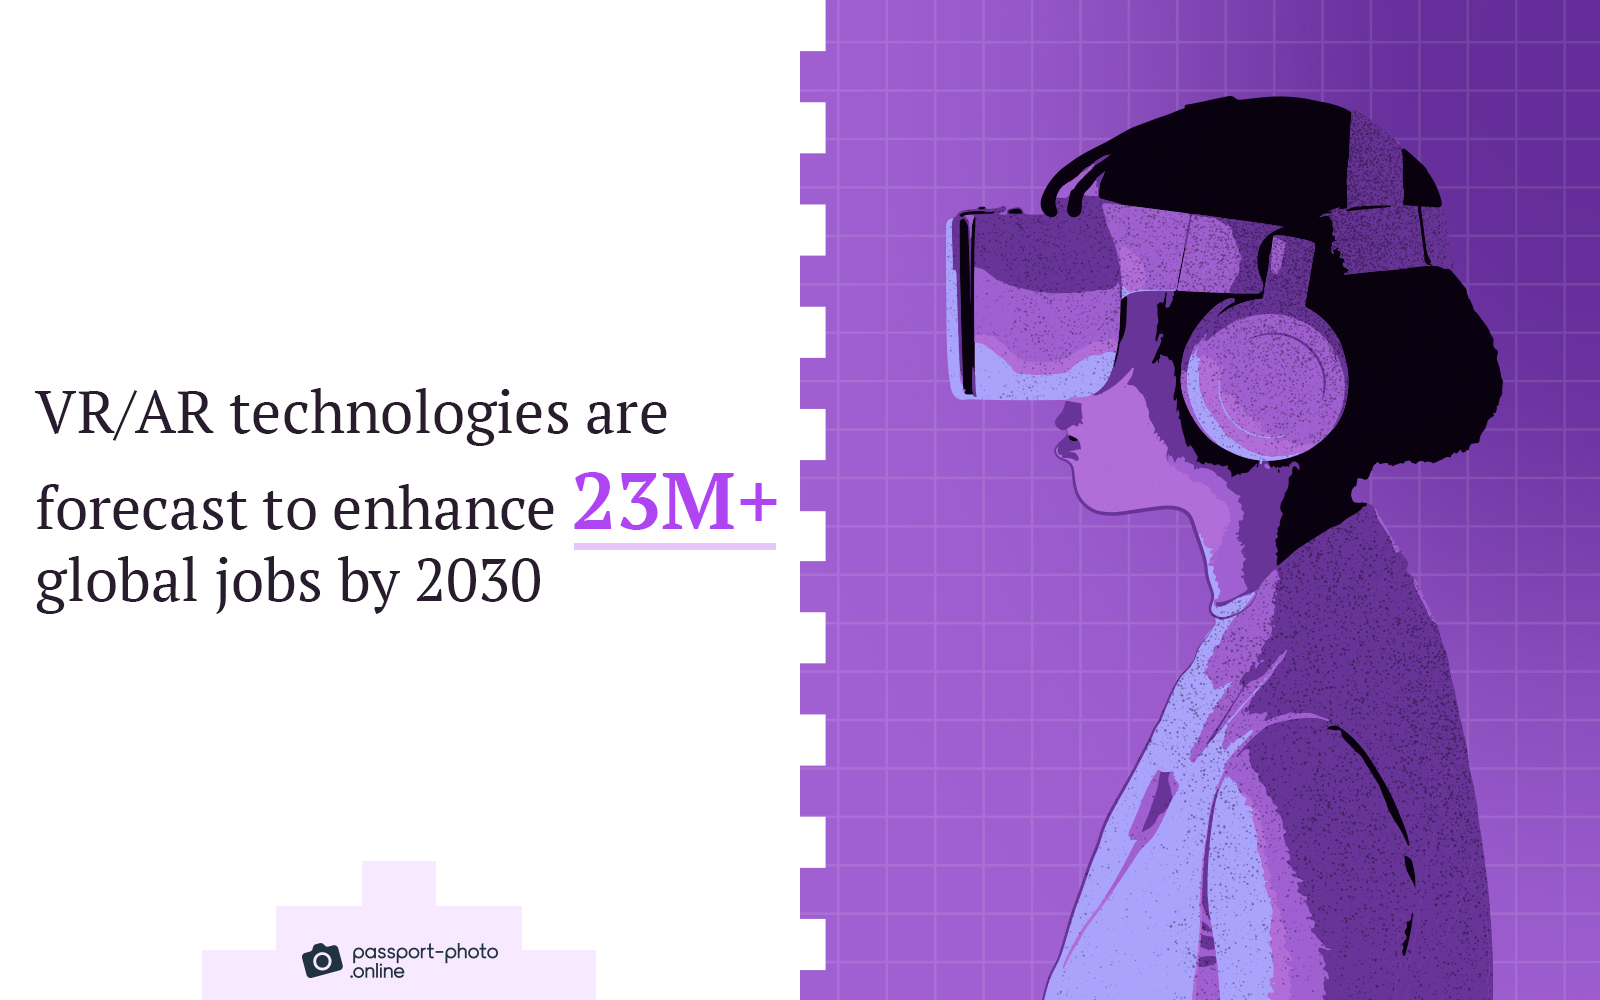 VR/AR tech is forecast to enhance 23M+ global jobs by 2030